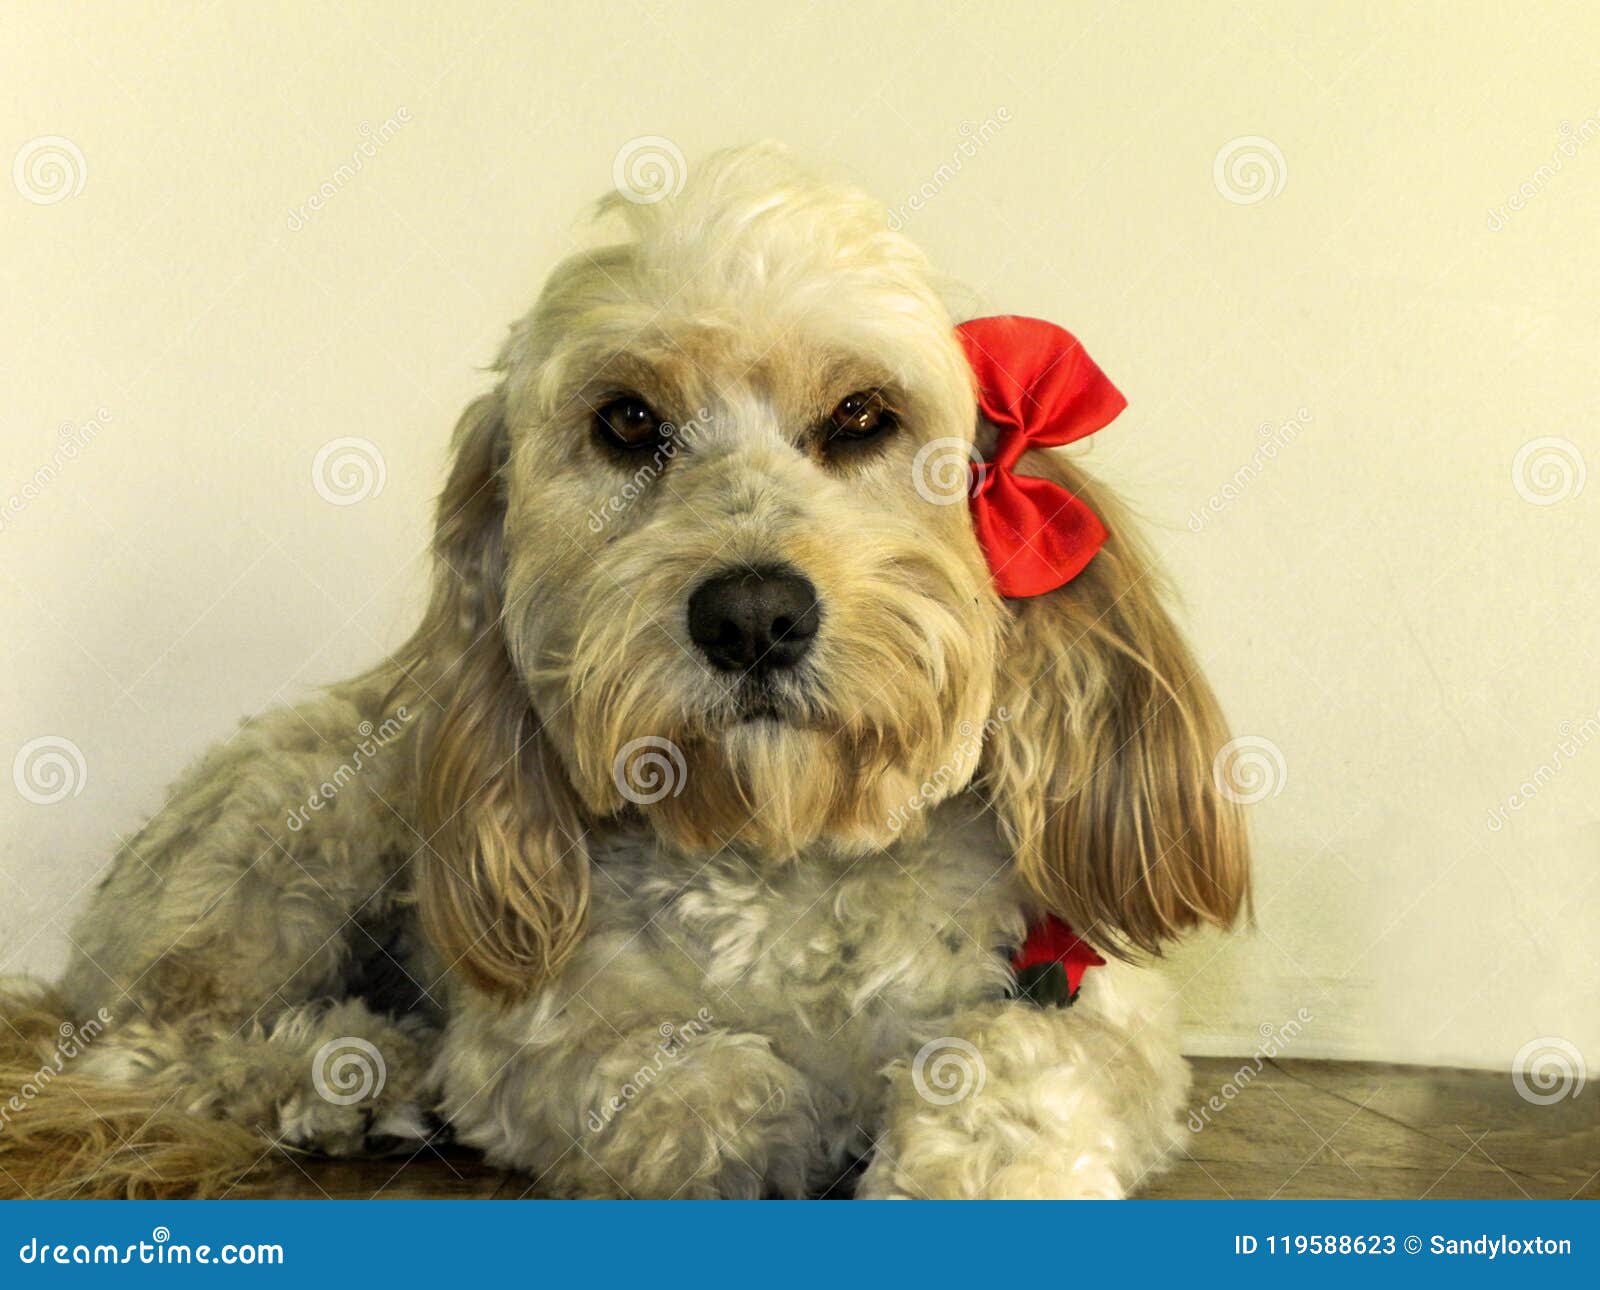 470 Cross Poodle Photos Free Royalty Free Stock Photos From Dreamstime